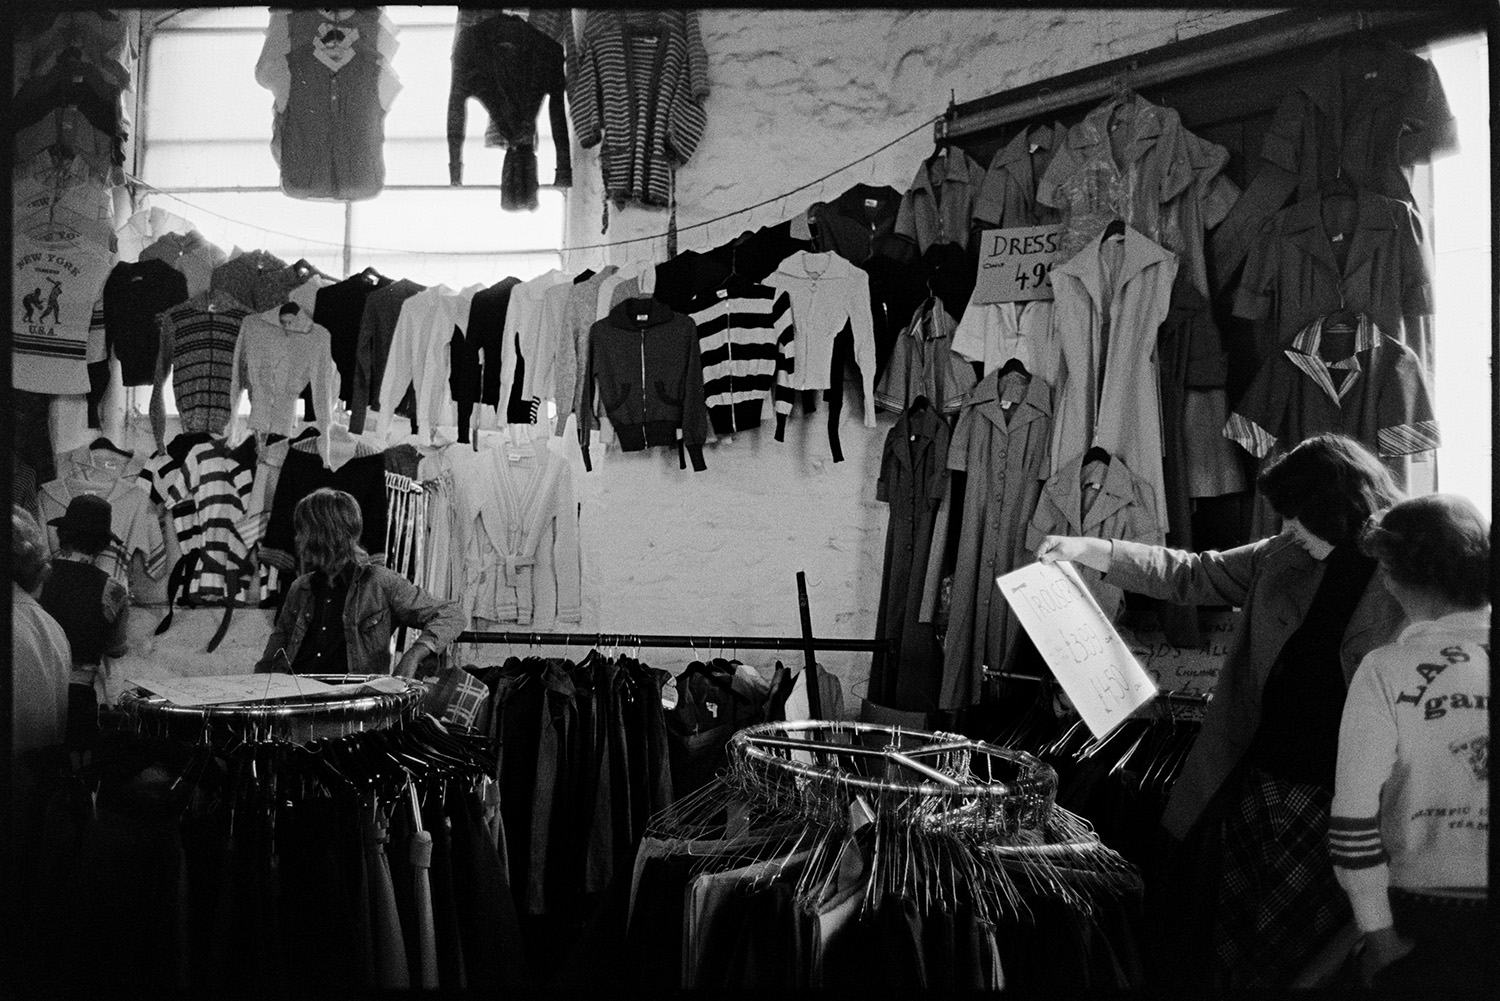 Stalls at Pannier Market, food, clothes. 
[People looking at items on a clothes stall in Bideford Pannier Market. The clothes are displayed on rails and strung across the wall of the pannier market.]